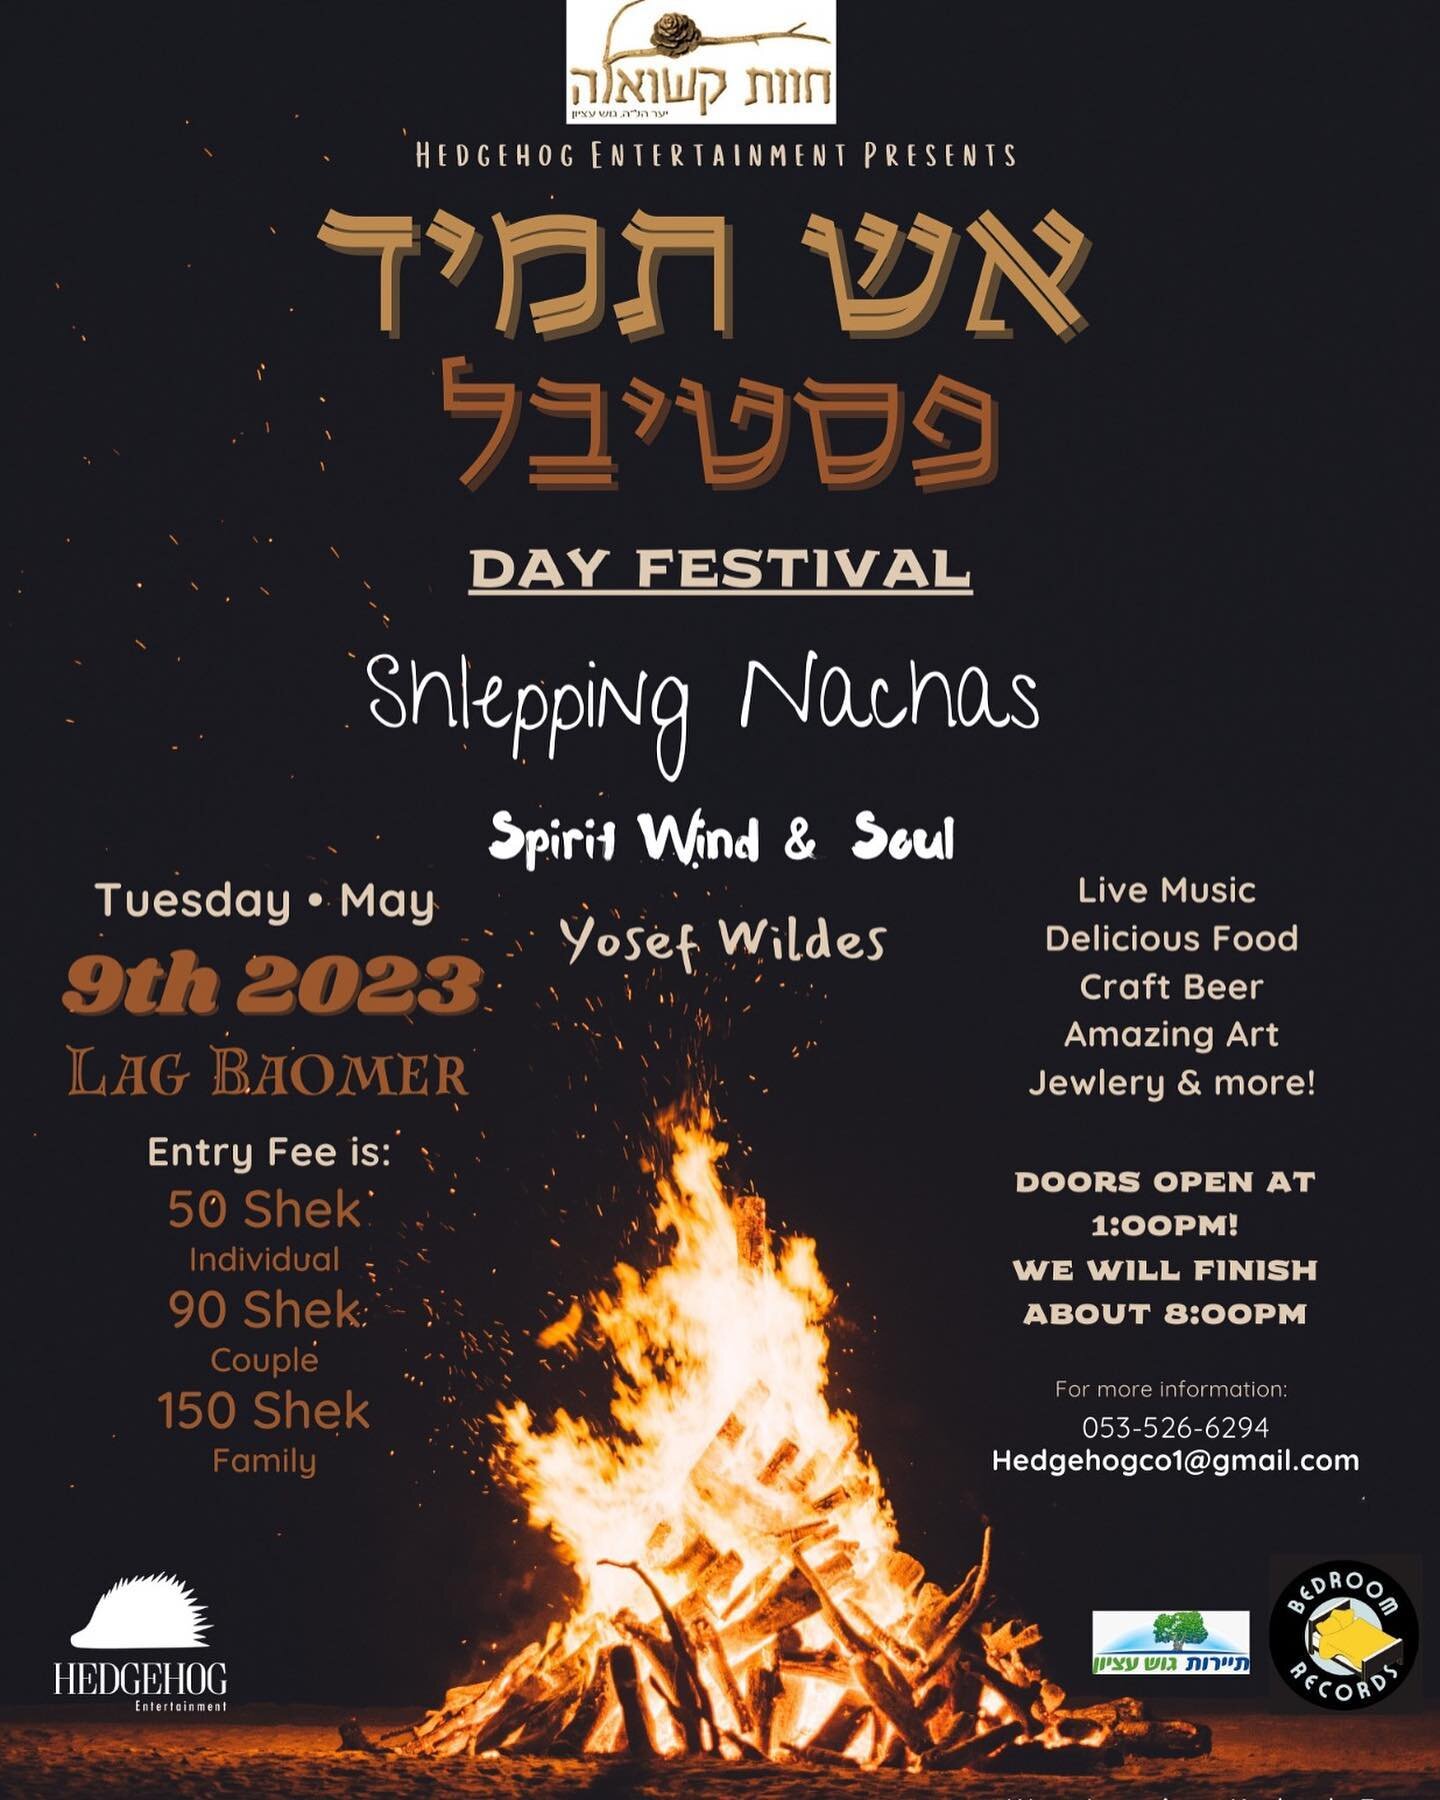 We can't wait to gather together on Lag B'aomer&nbsp;Day for a special festival at Kashuela&nbsp;Farm in Gush Ezion. 

Join us for live music by Shlepping&nbsp;Nachas, Spirit, Wind &amp; Soul &amp; Yosef Wildes! There will also be delicious food and 